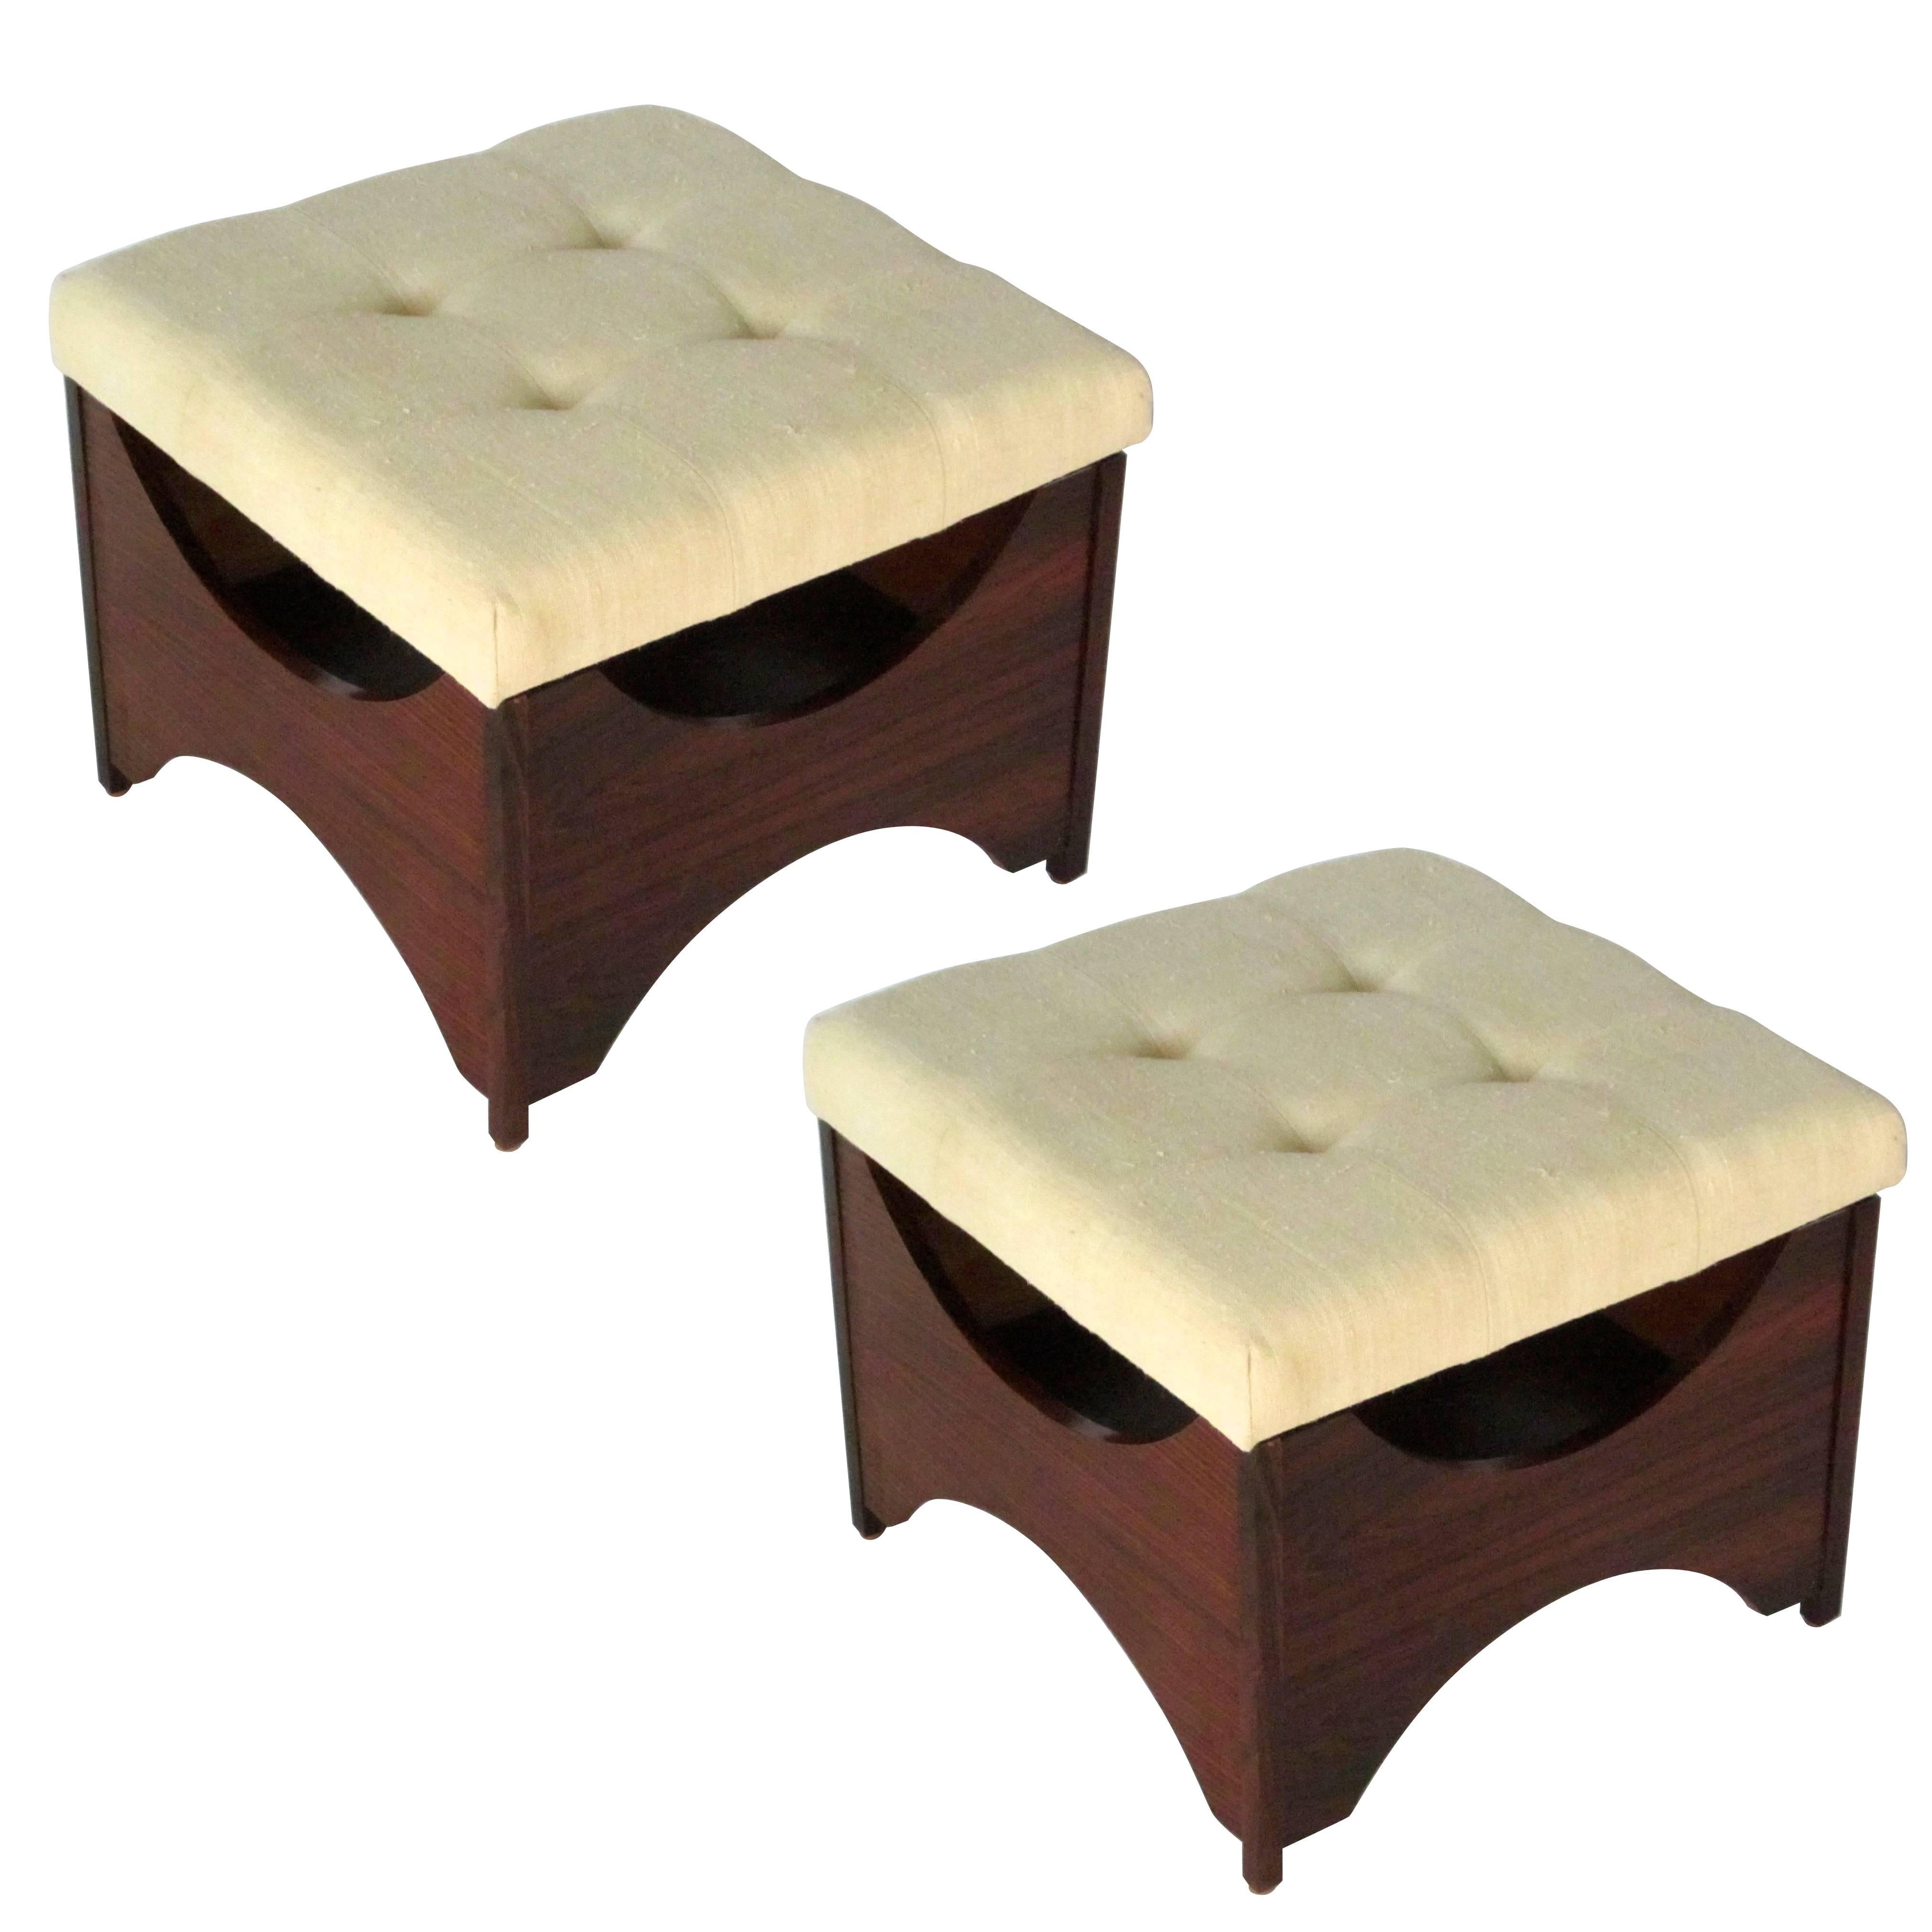 1960s Pair of Rosewood Square Upholstered Seat Foot Stools, France